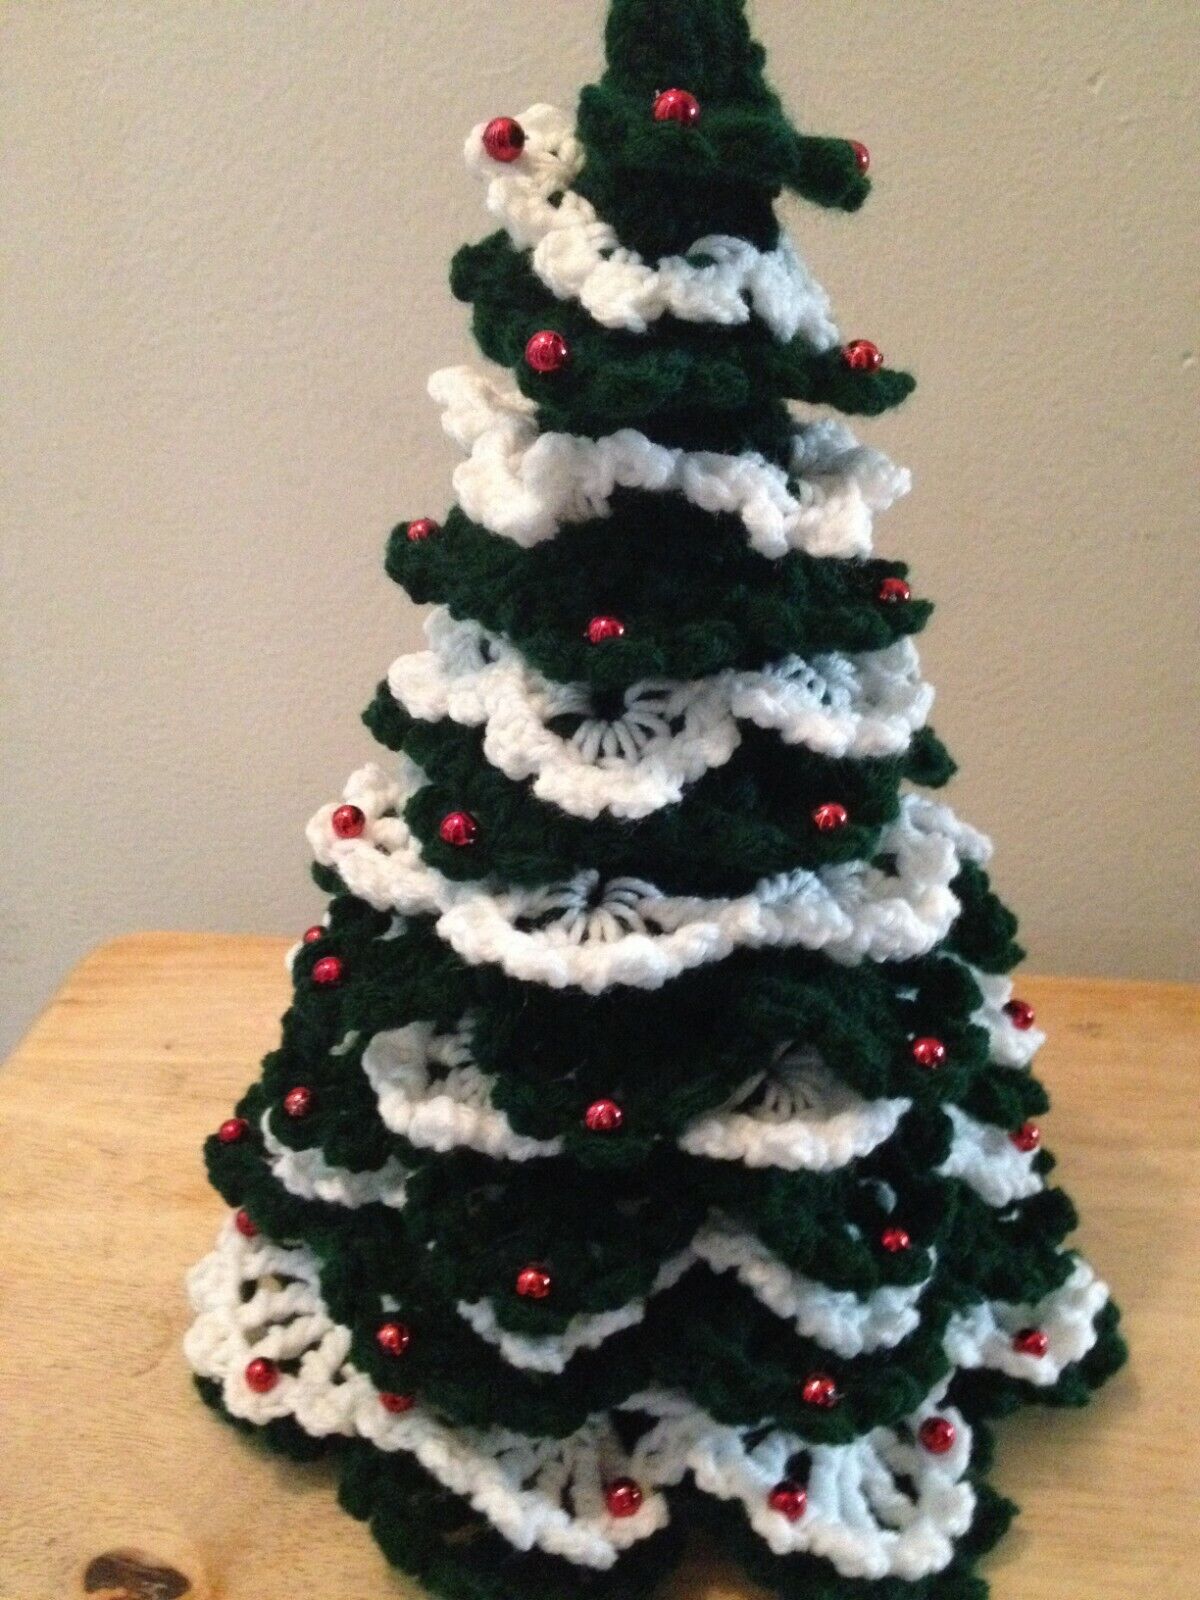 Crochet Christmas Tree, Green & White with Red Decorations